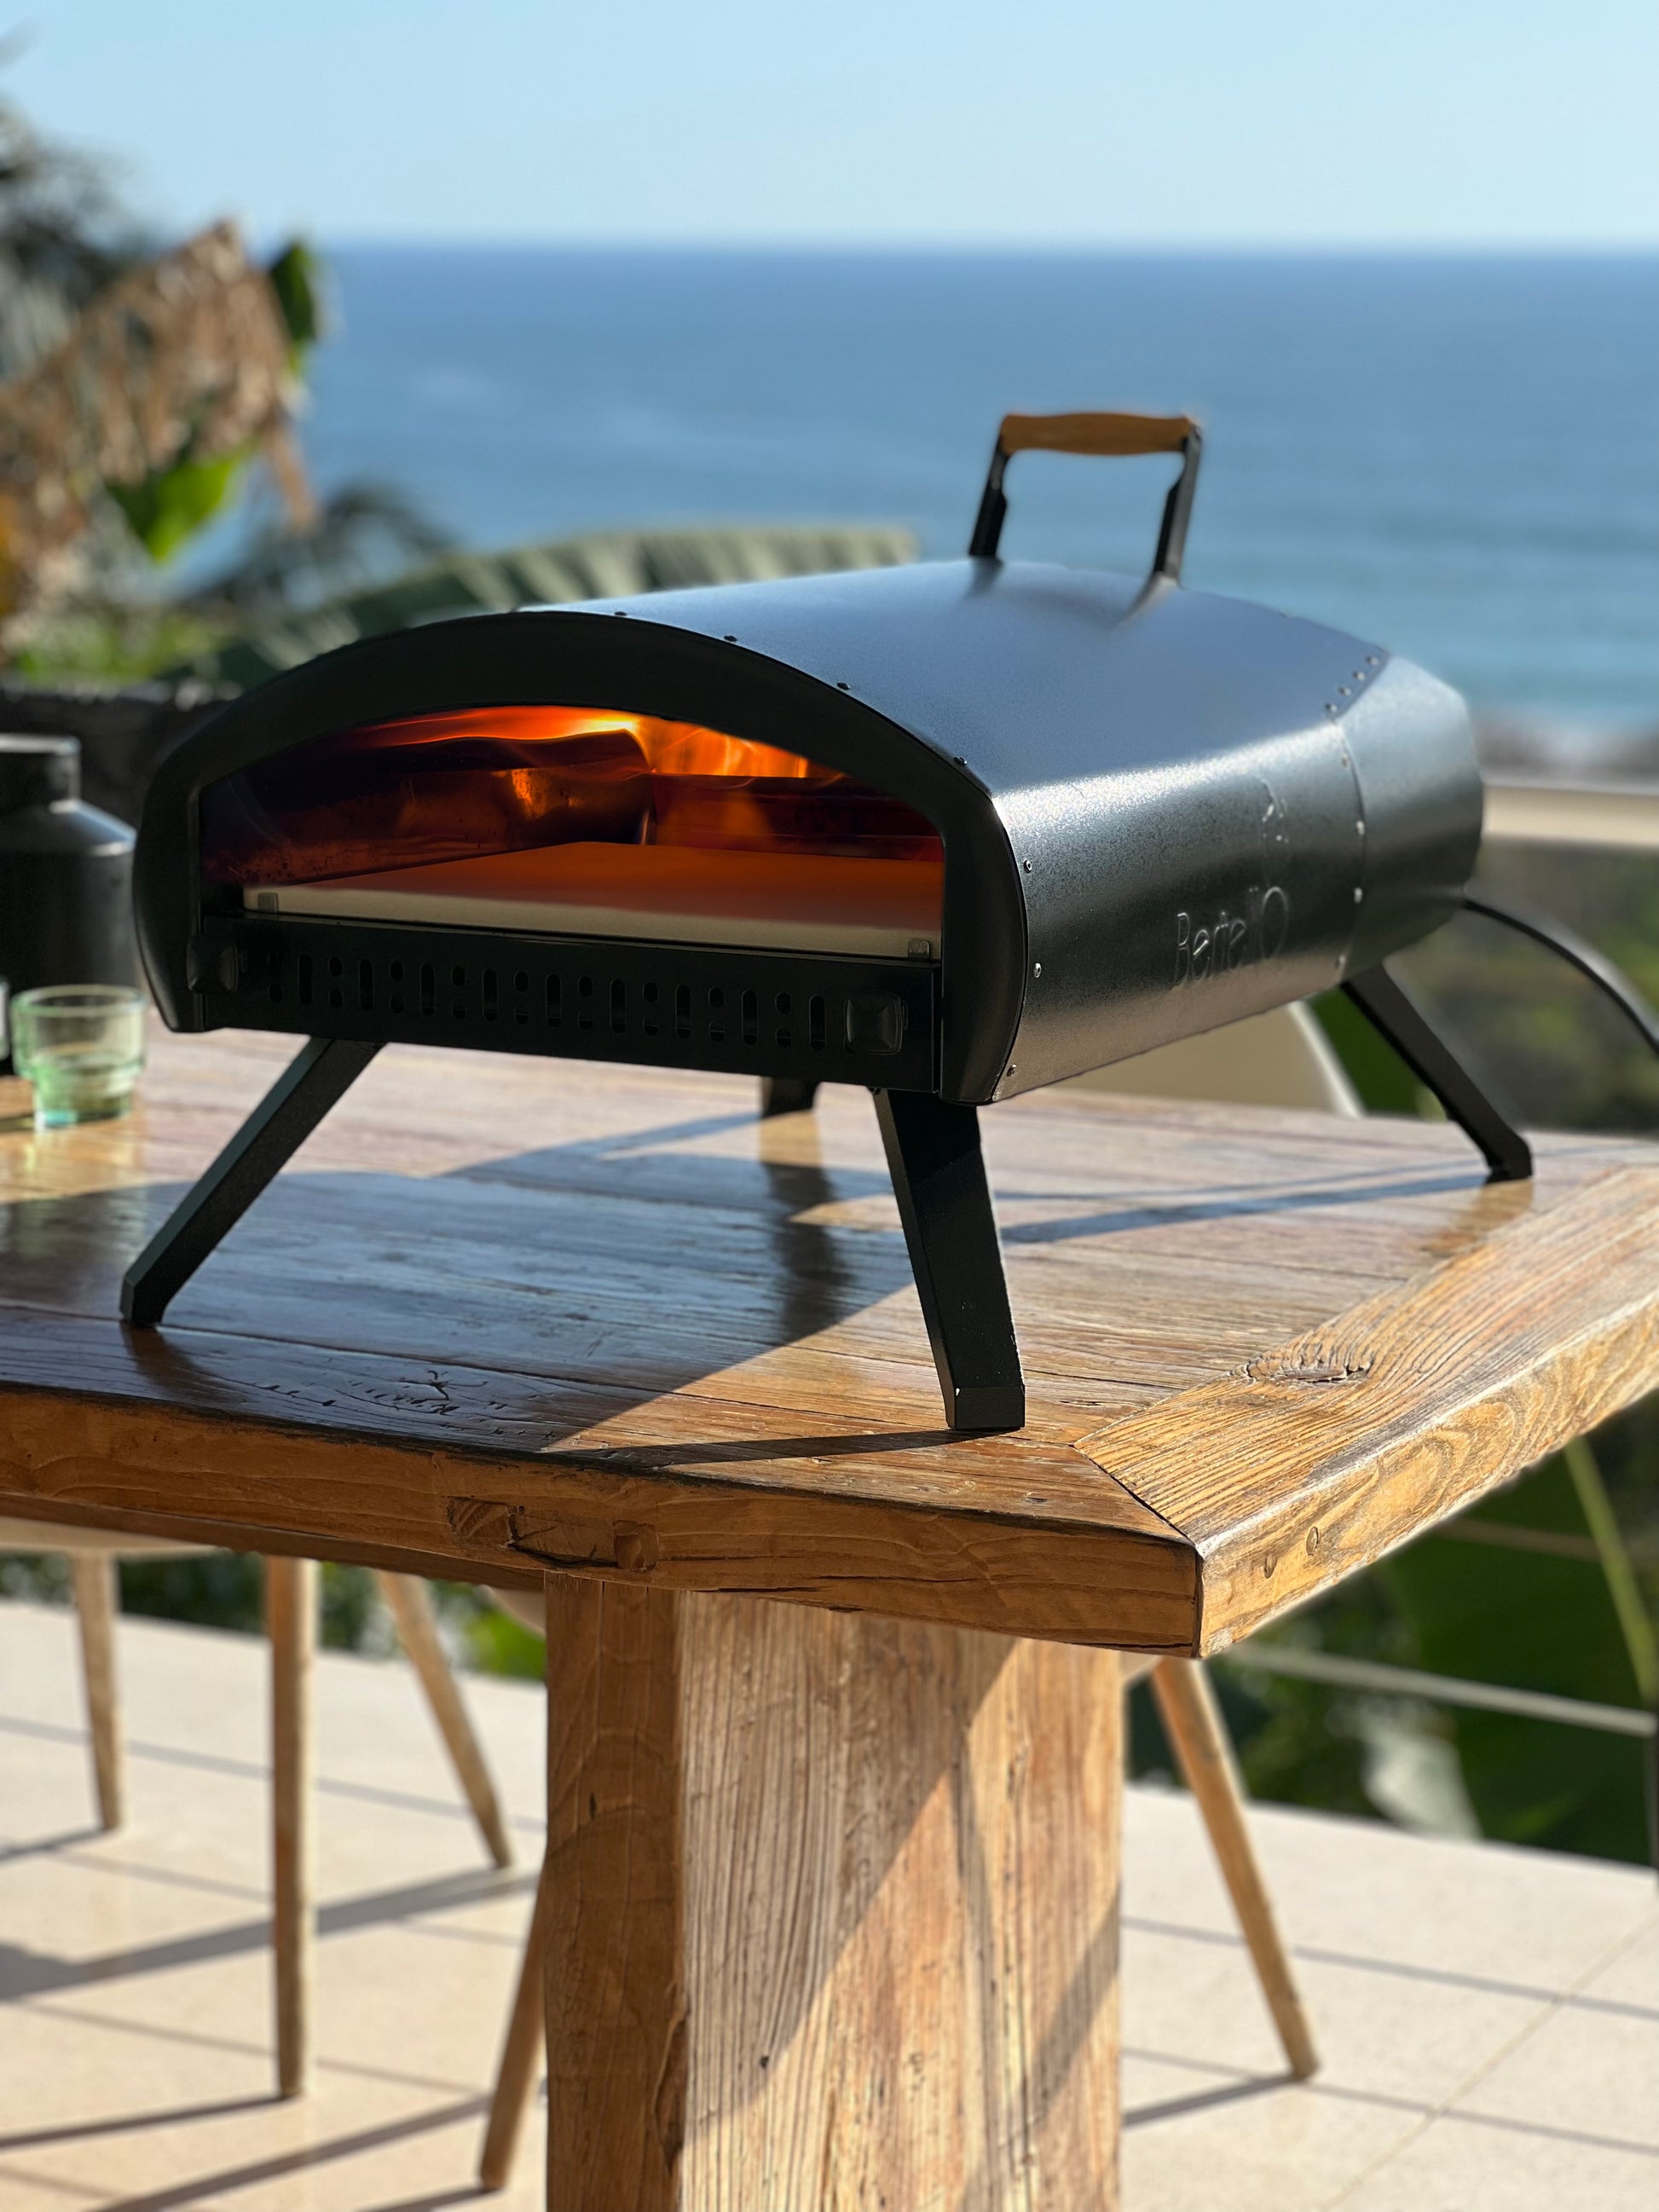 Propane Tank Burning Outdoor Pizza Oven with Accessories in Stainless Steel